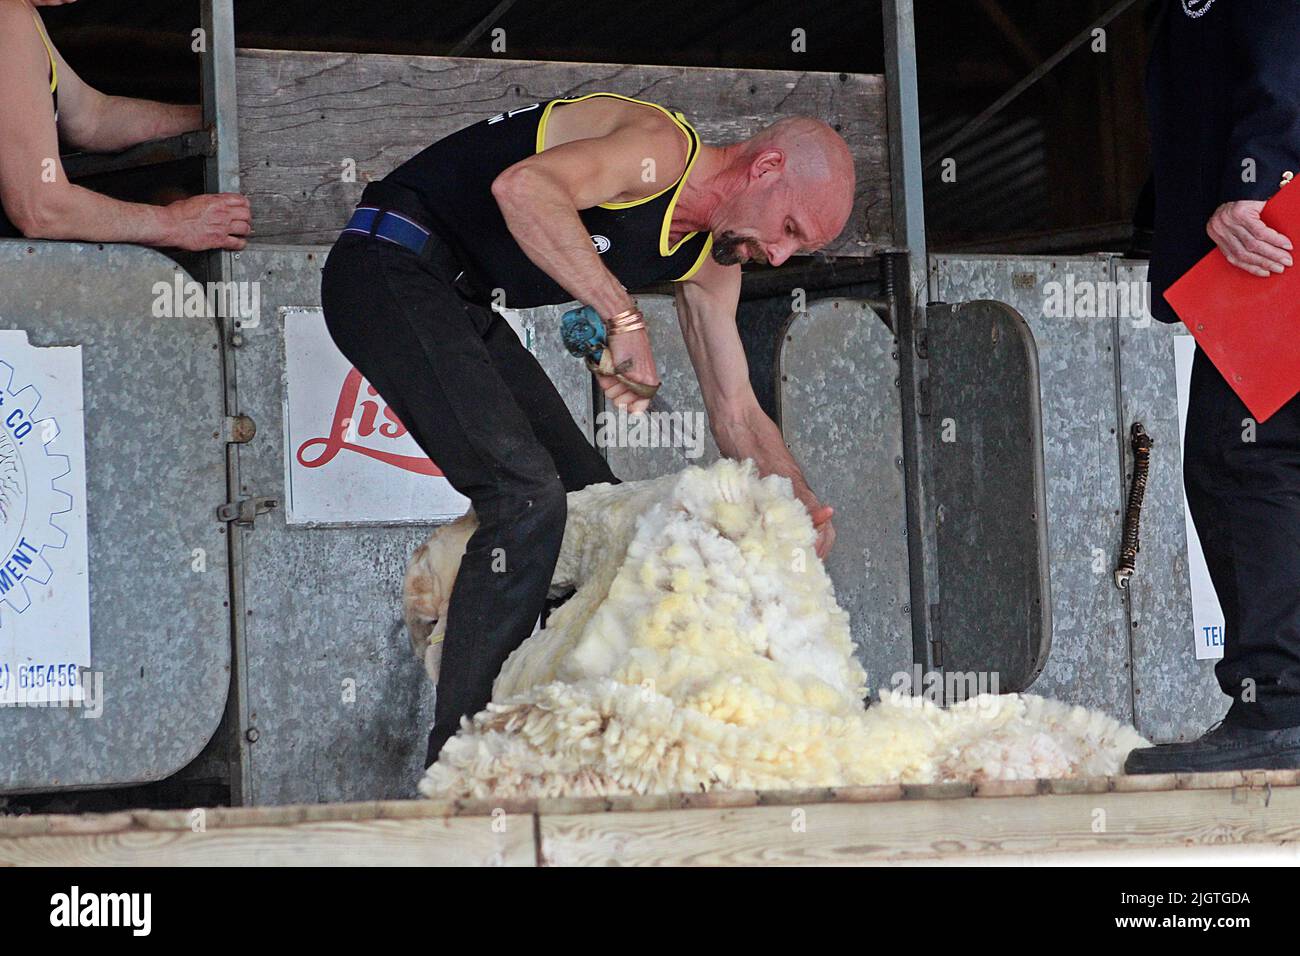 EXETER, DEVON - MAY 18, 2017 Devon County Agricultural Show - Sheep Shearing competition (hand shears) standing Stock Photo